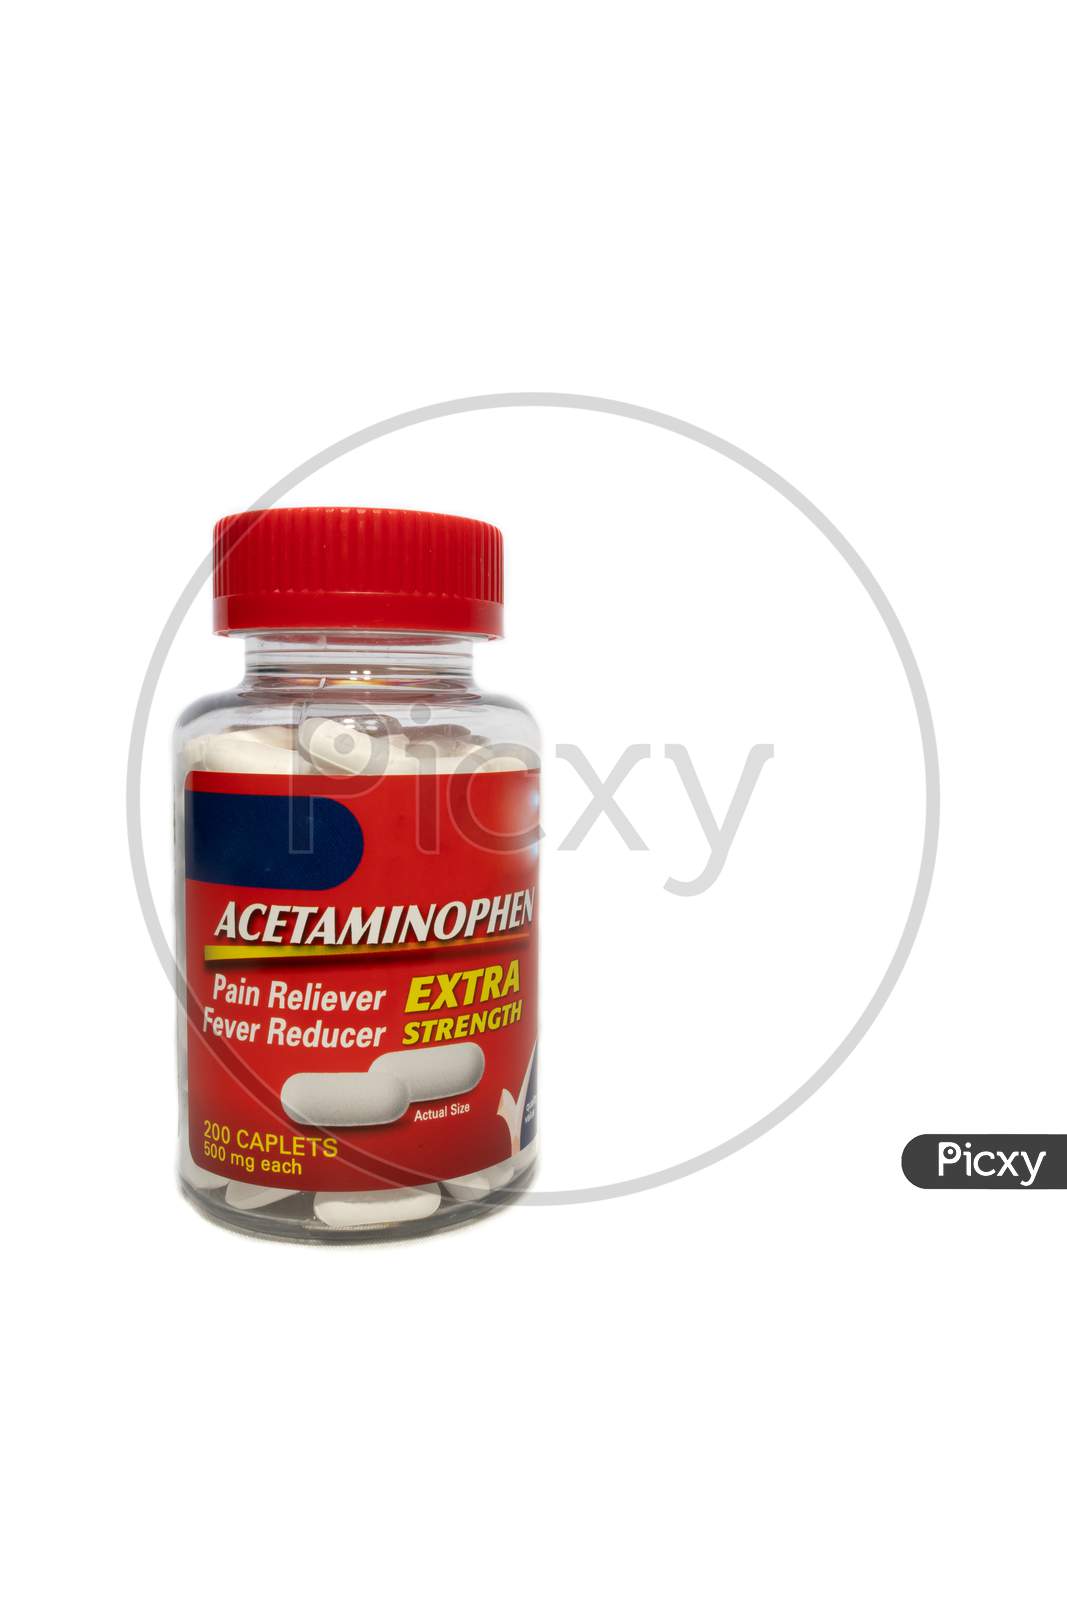 Red Acetaminophen Bottle Full Of Pills On A White Background.